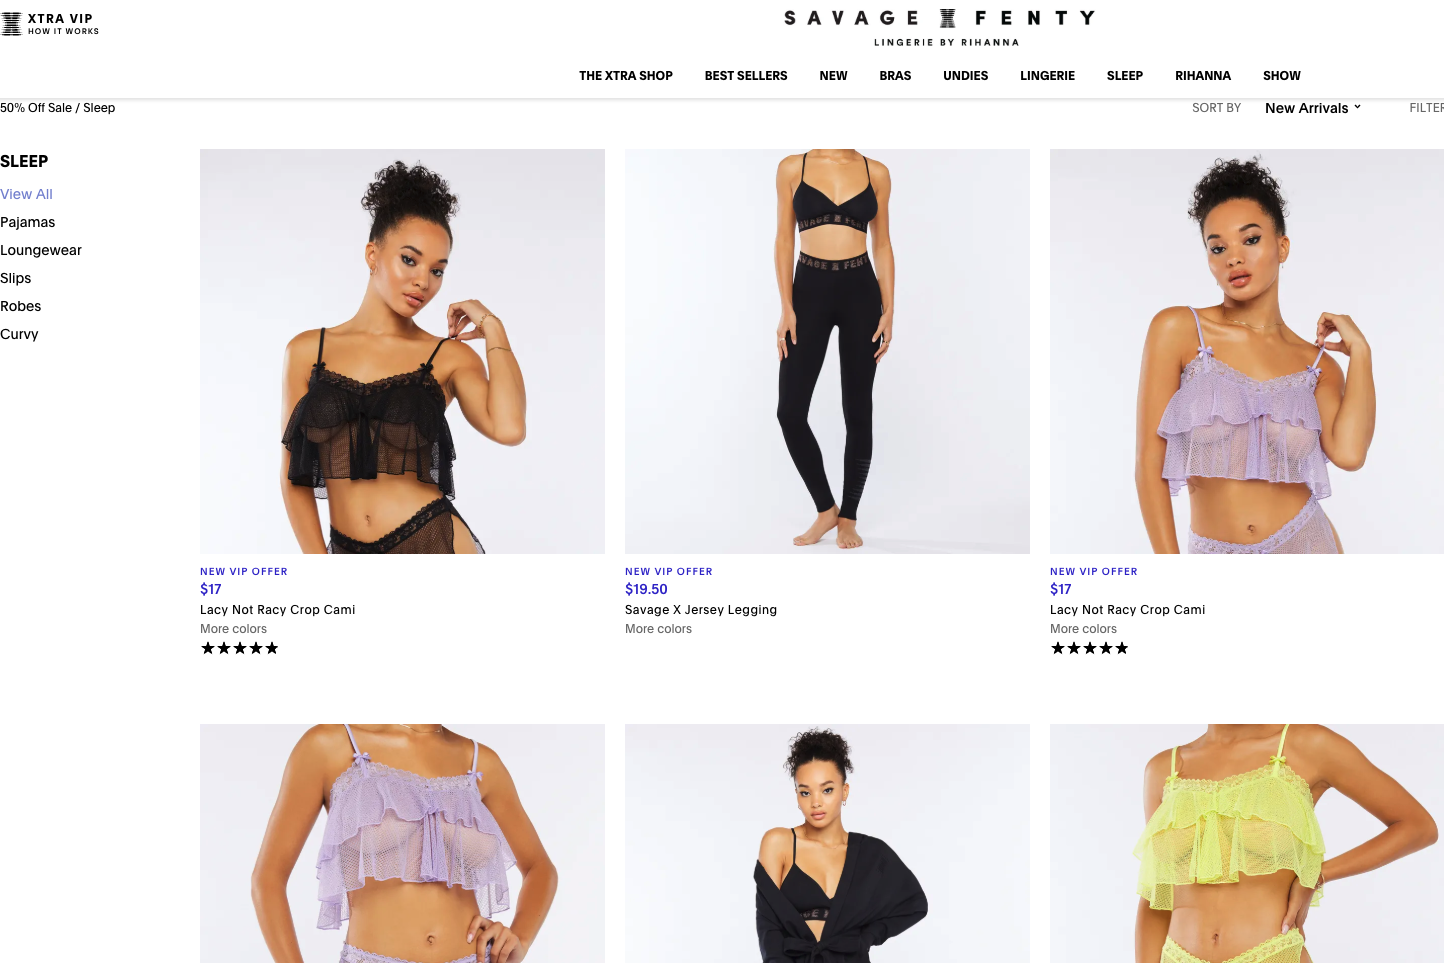 Prices displayed on company's website are for membership only (Savage X Fenty)